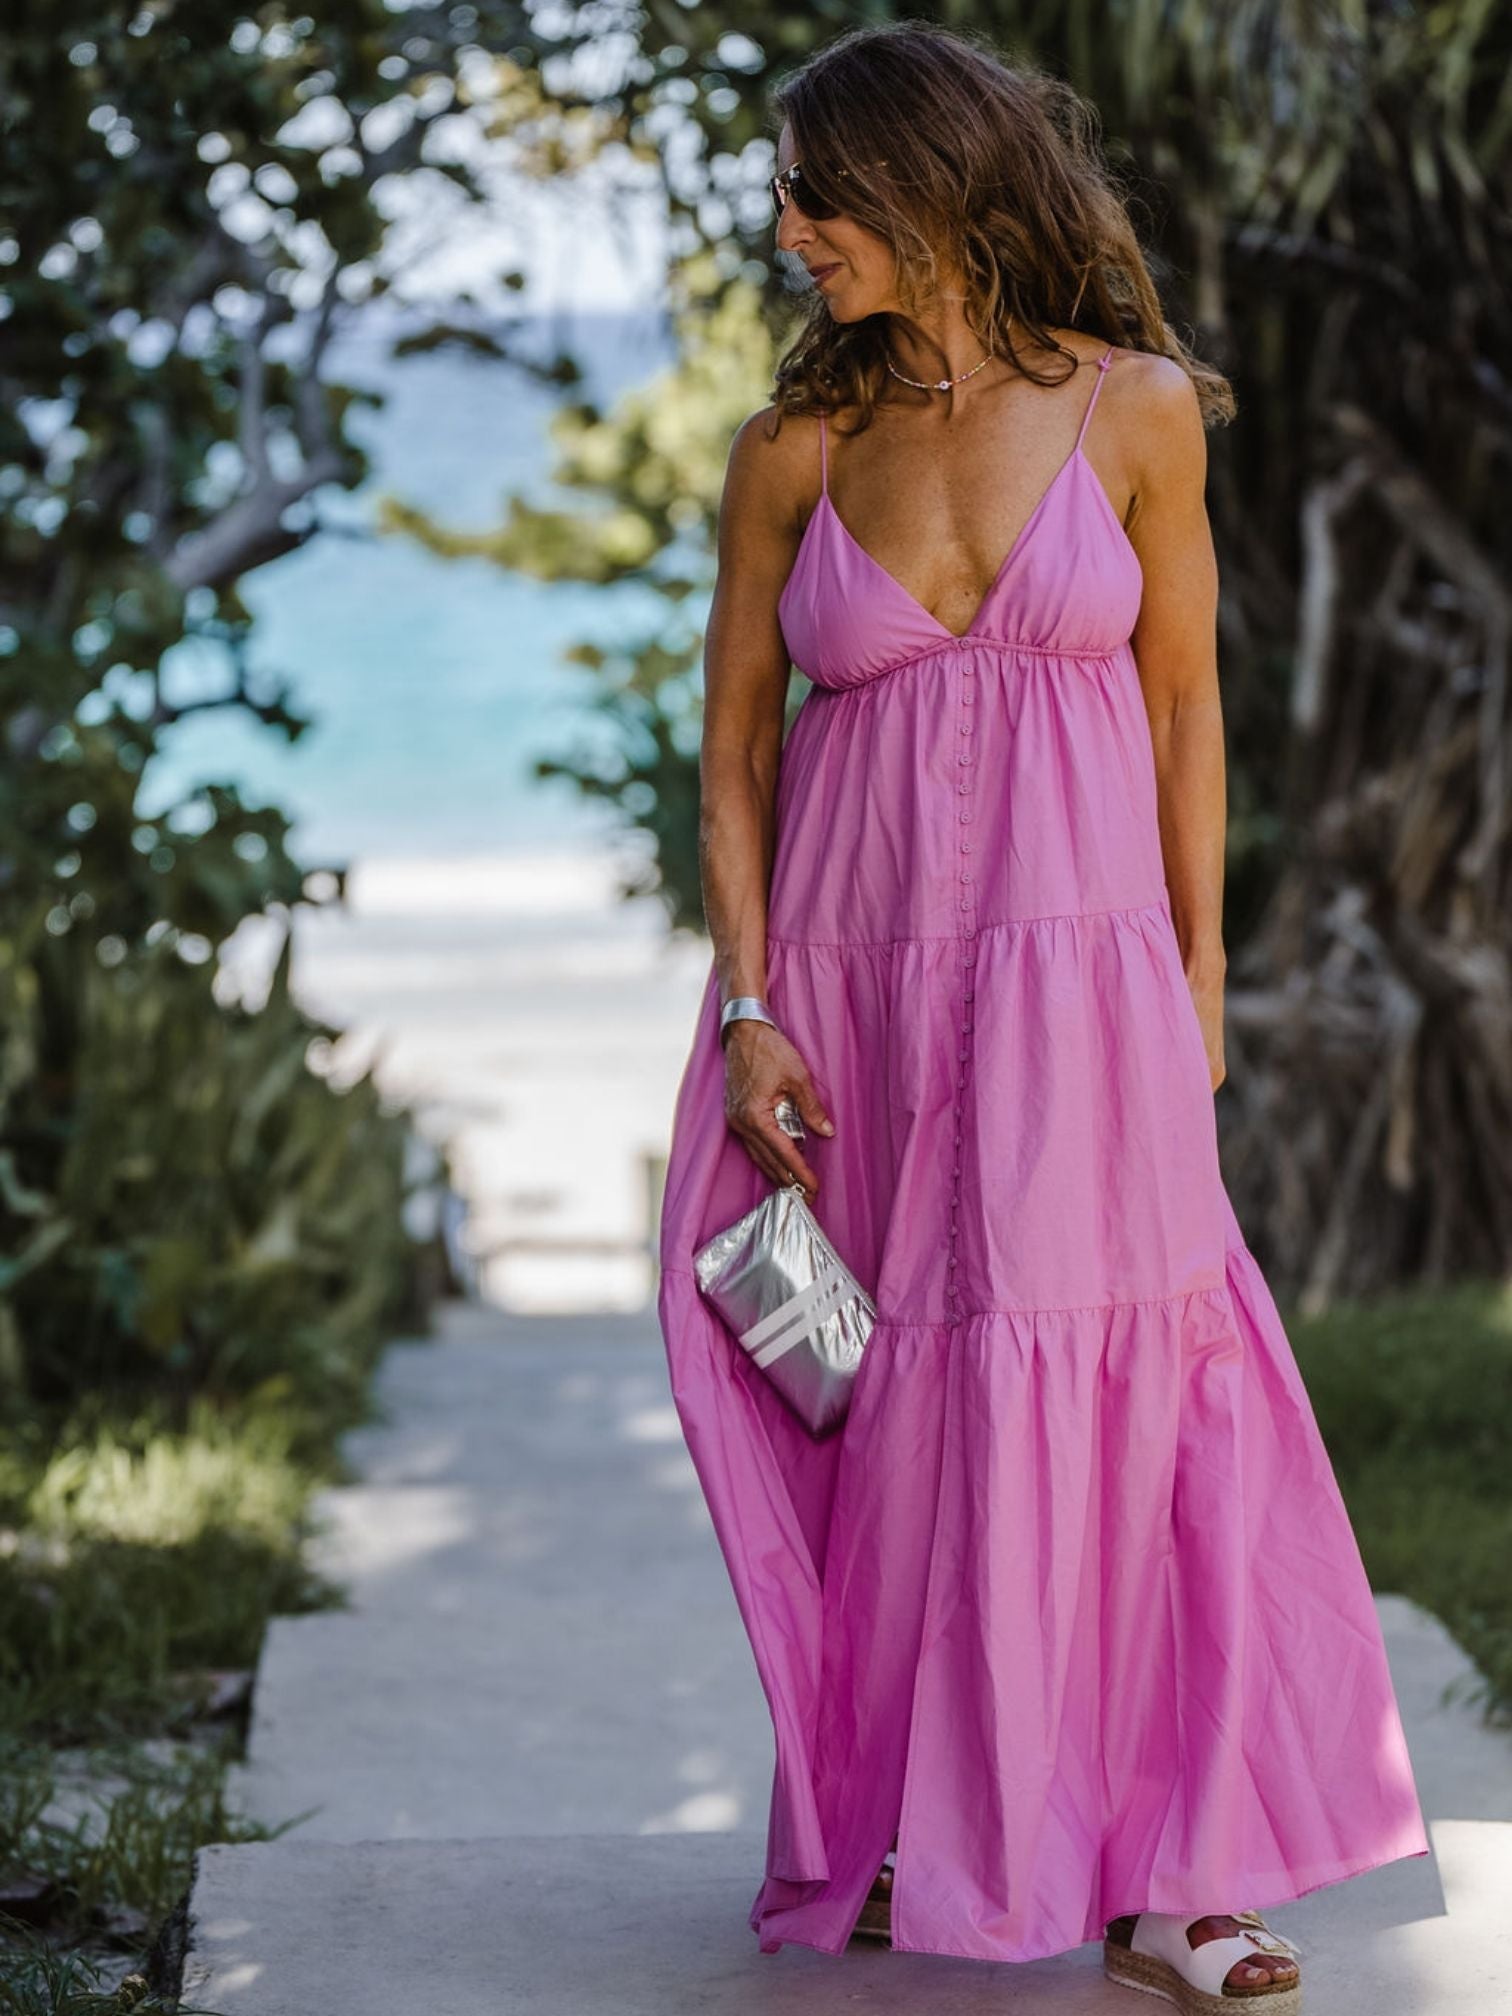 Woman standing on beach front in flowy pink dress holding silver wristlet